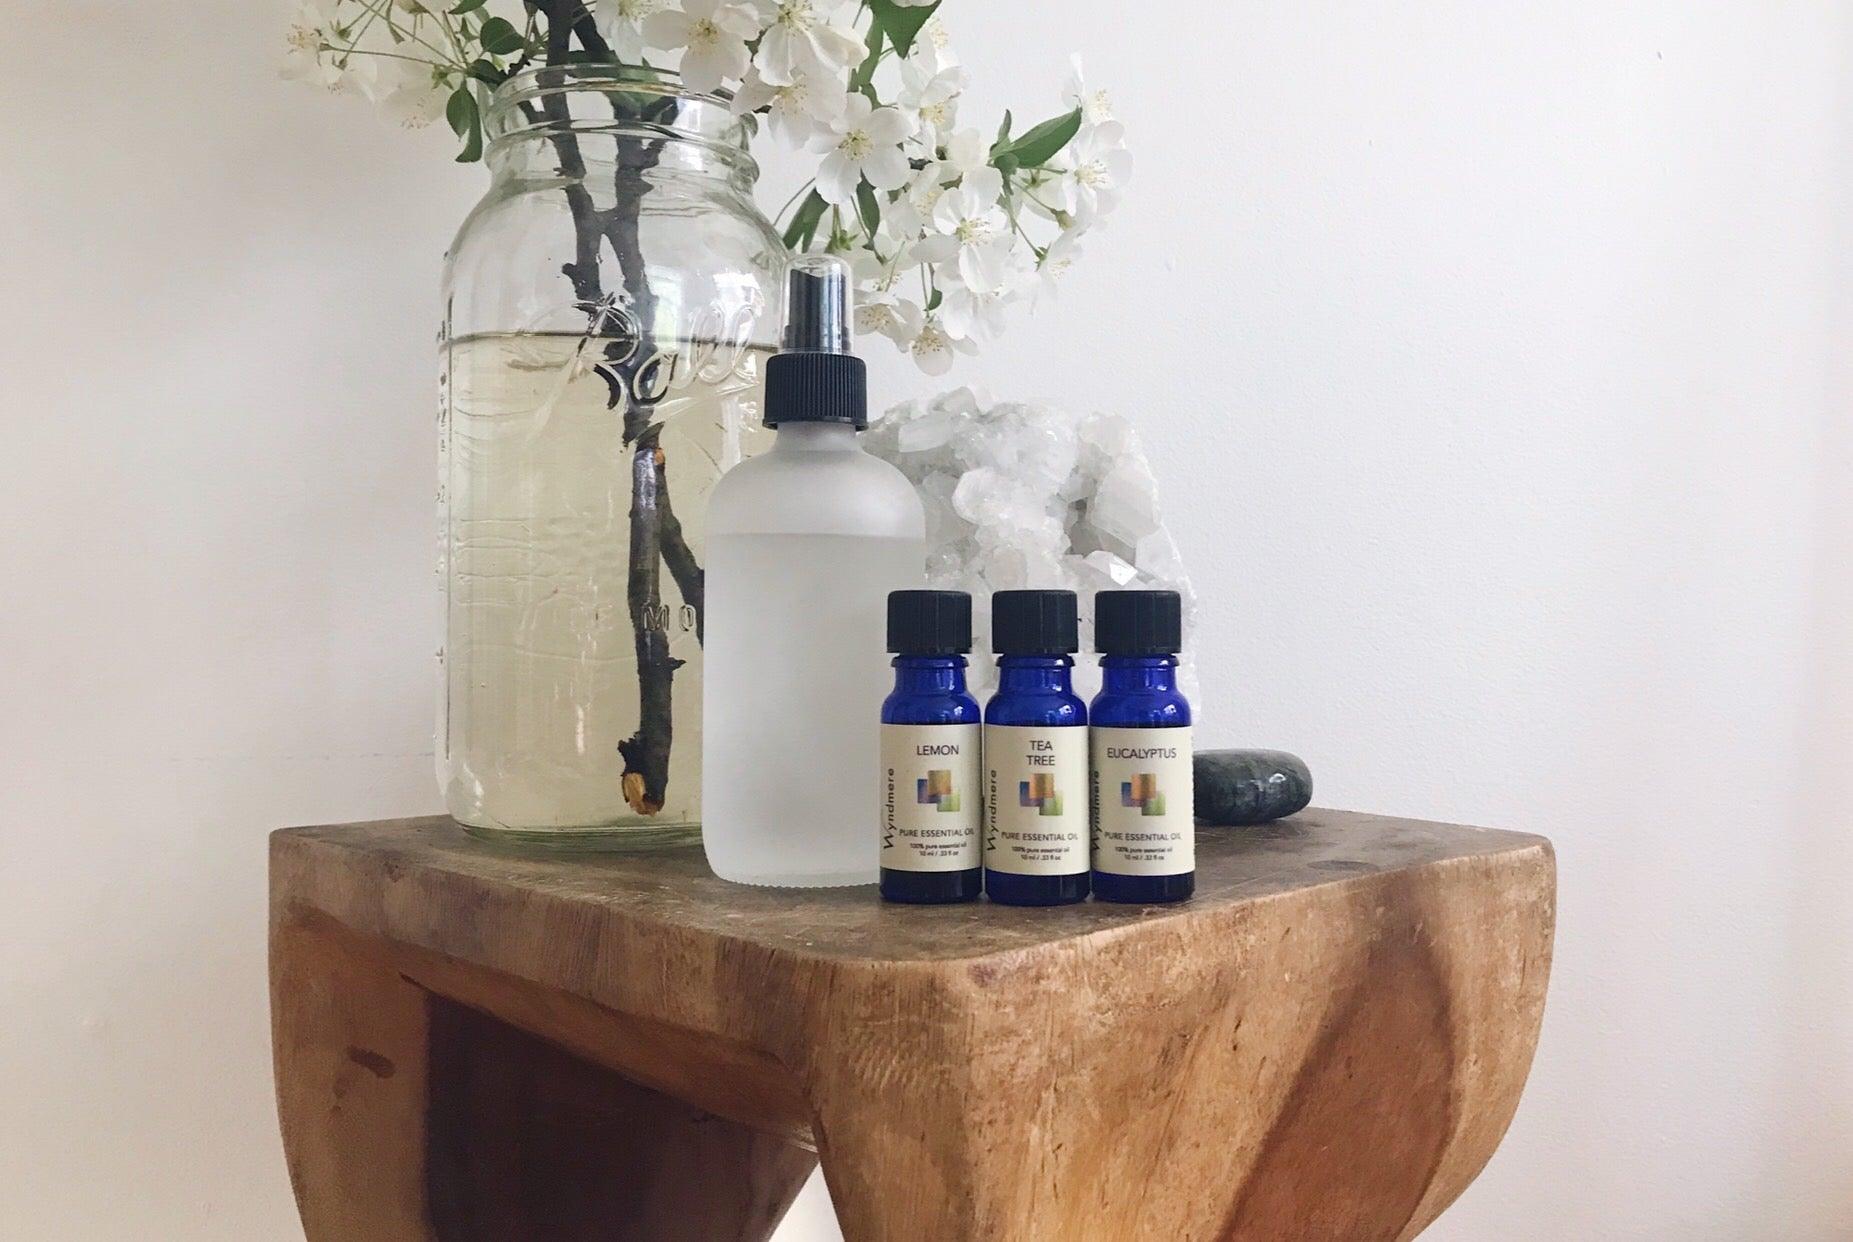 Wyndmere Naturals - Spring Cleaning DIY cleaning supplies made with pure essential oils. There are a lot of safe natural products you can use instead that also have the side benefit of being good for your health and wellness.